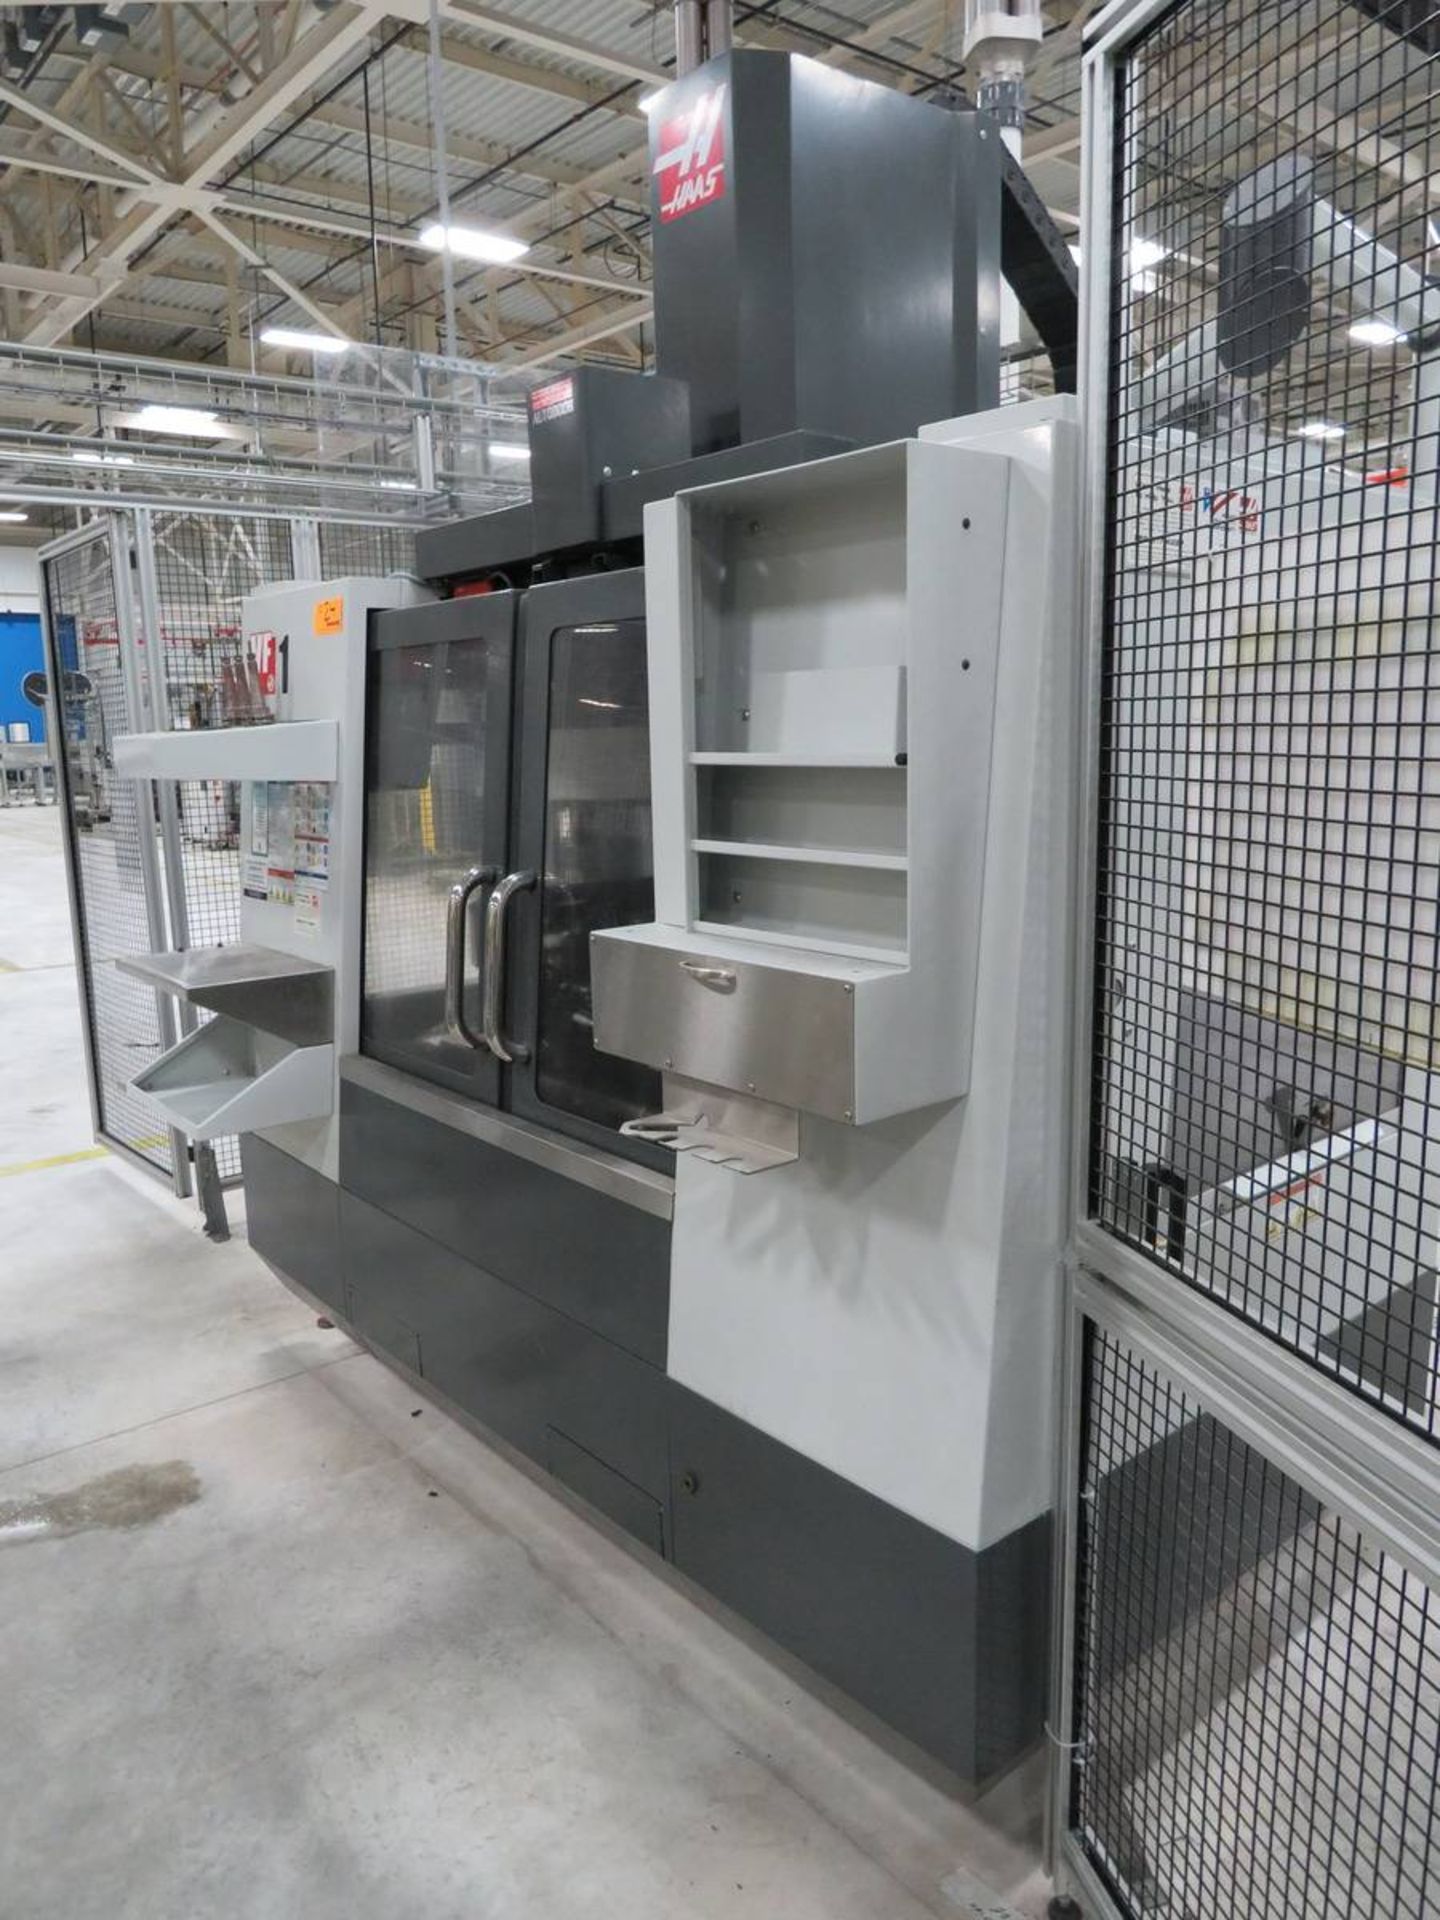 2011 Haas VF-1 3-Axis CNC Vertical Machining Center - Image 2 of 13